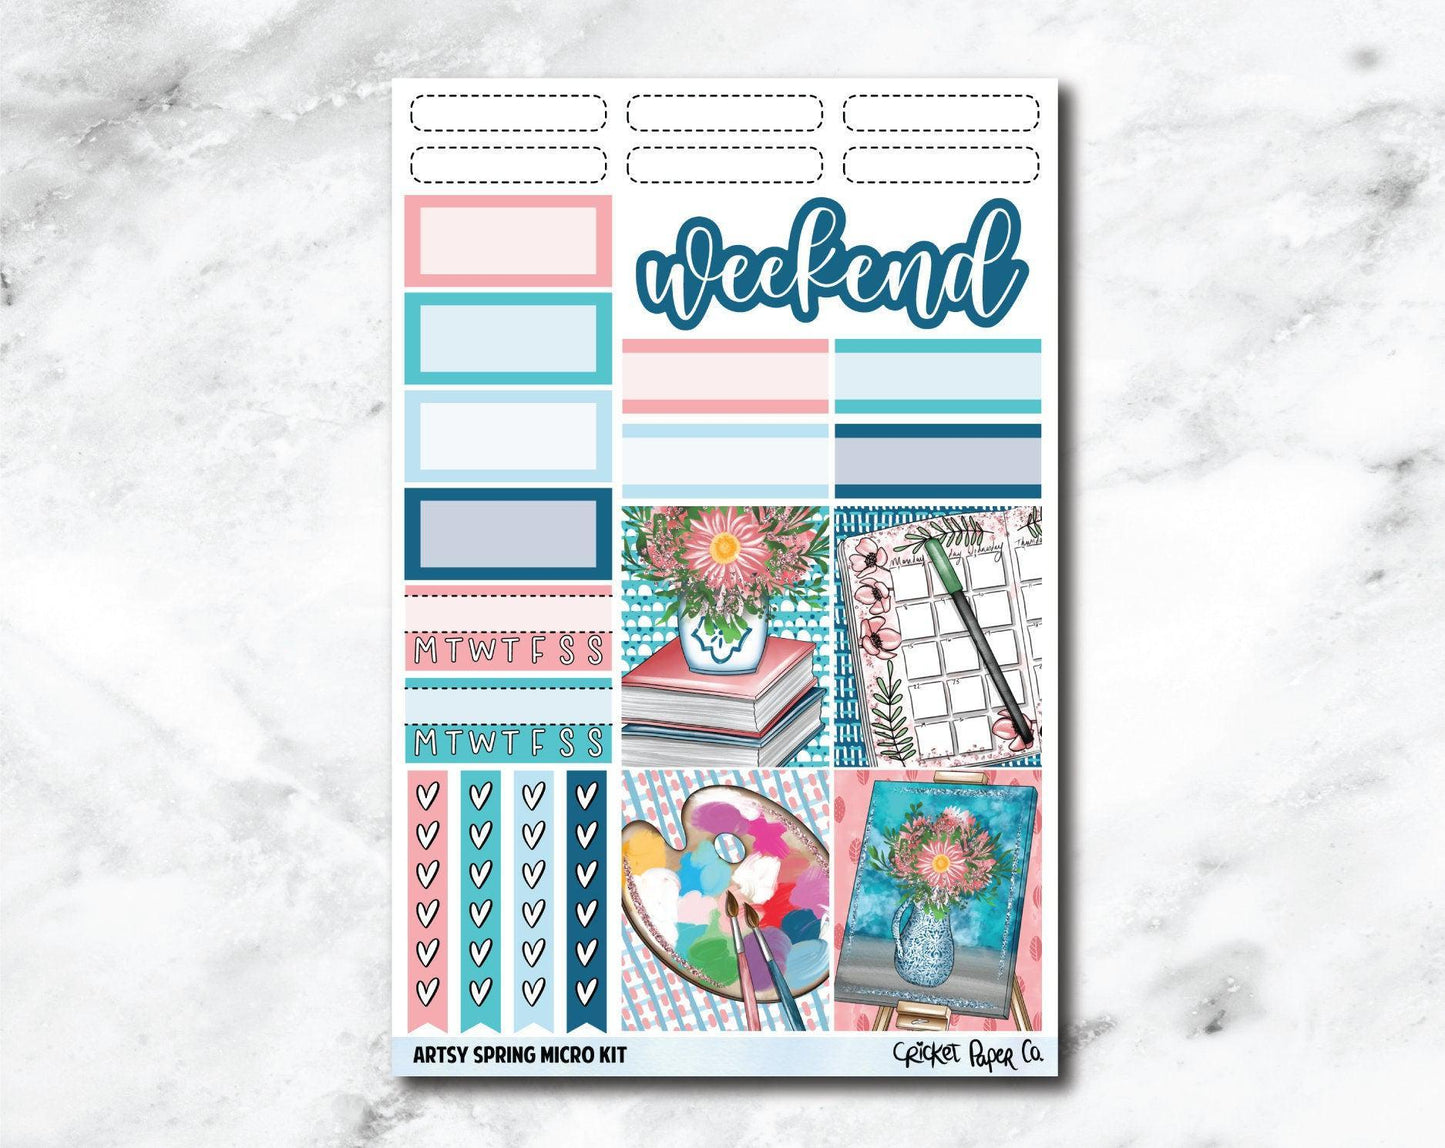 MICRO KIT Planner Stickers - Artsy Spring-Cricket Paper Co.